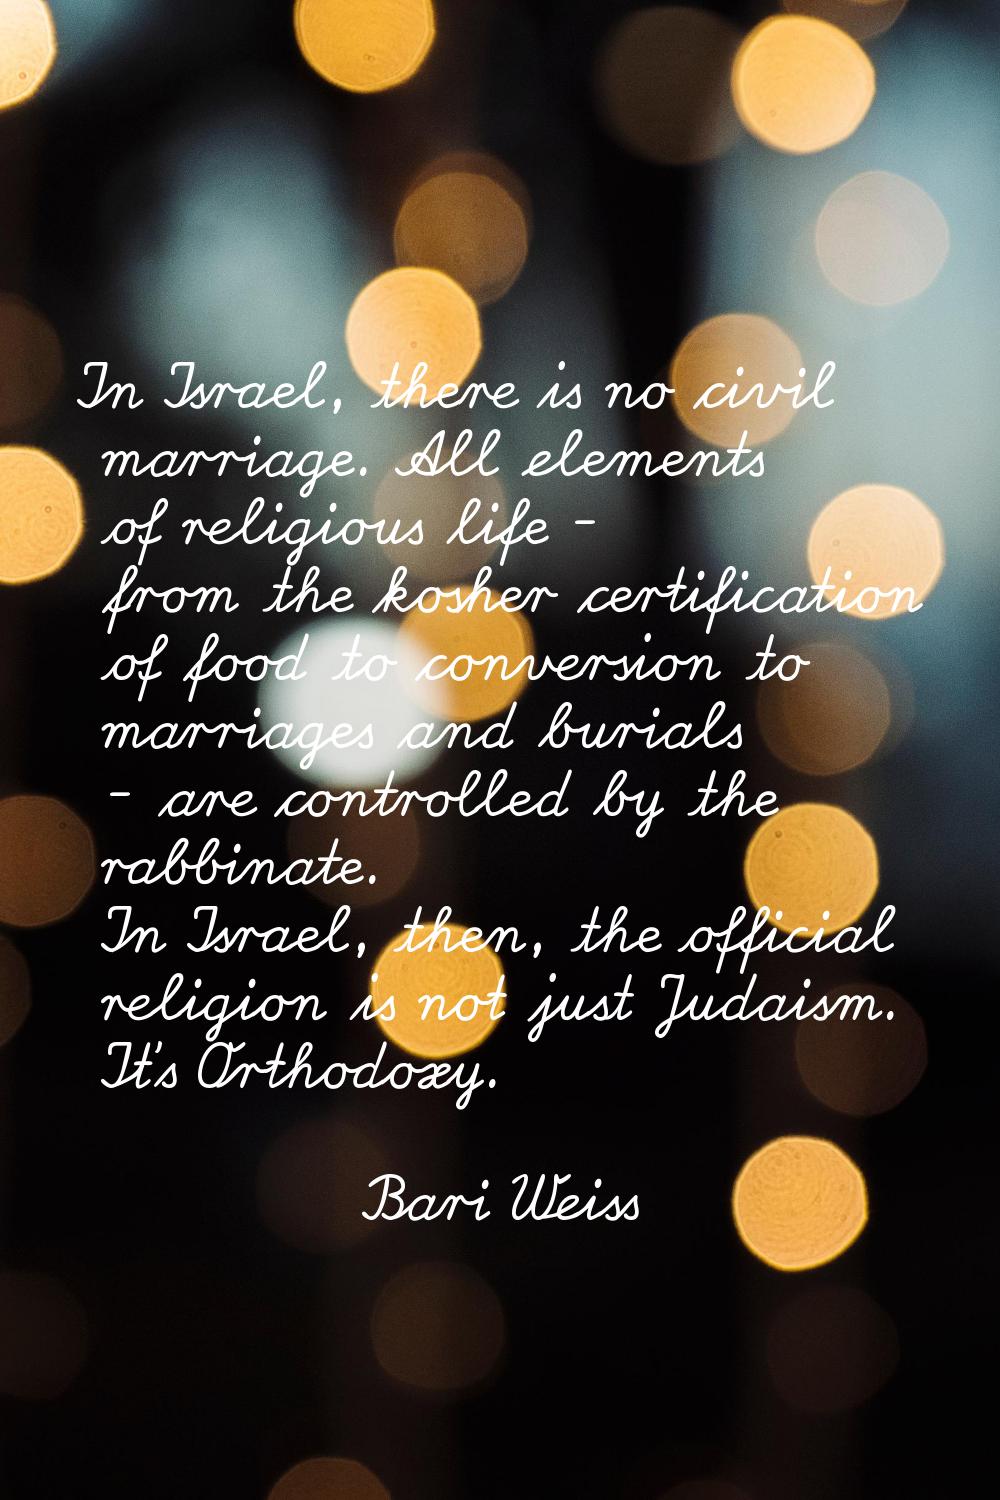 In Israel, there is no civil marriage. All elements of religious life - from the kosher certificati